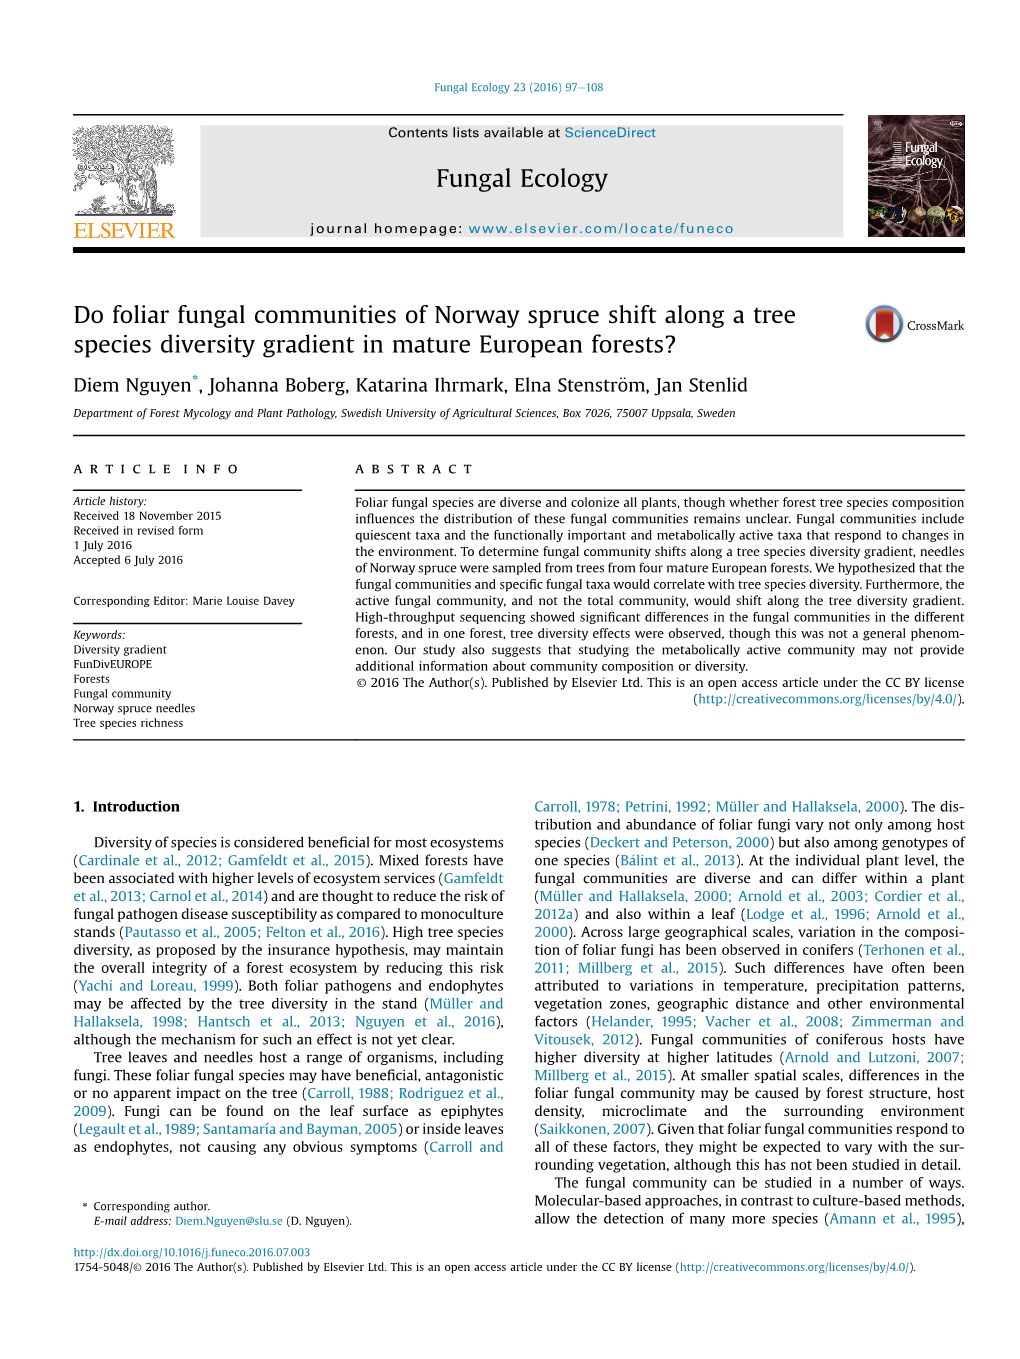 Do Foliar Fungal Communities of Norway Spruce Shift Along a Tree Species Diversity Gradient in Mature European Forests?